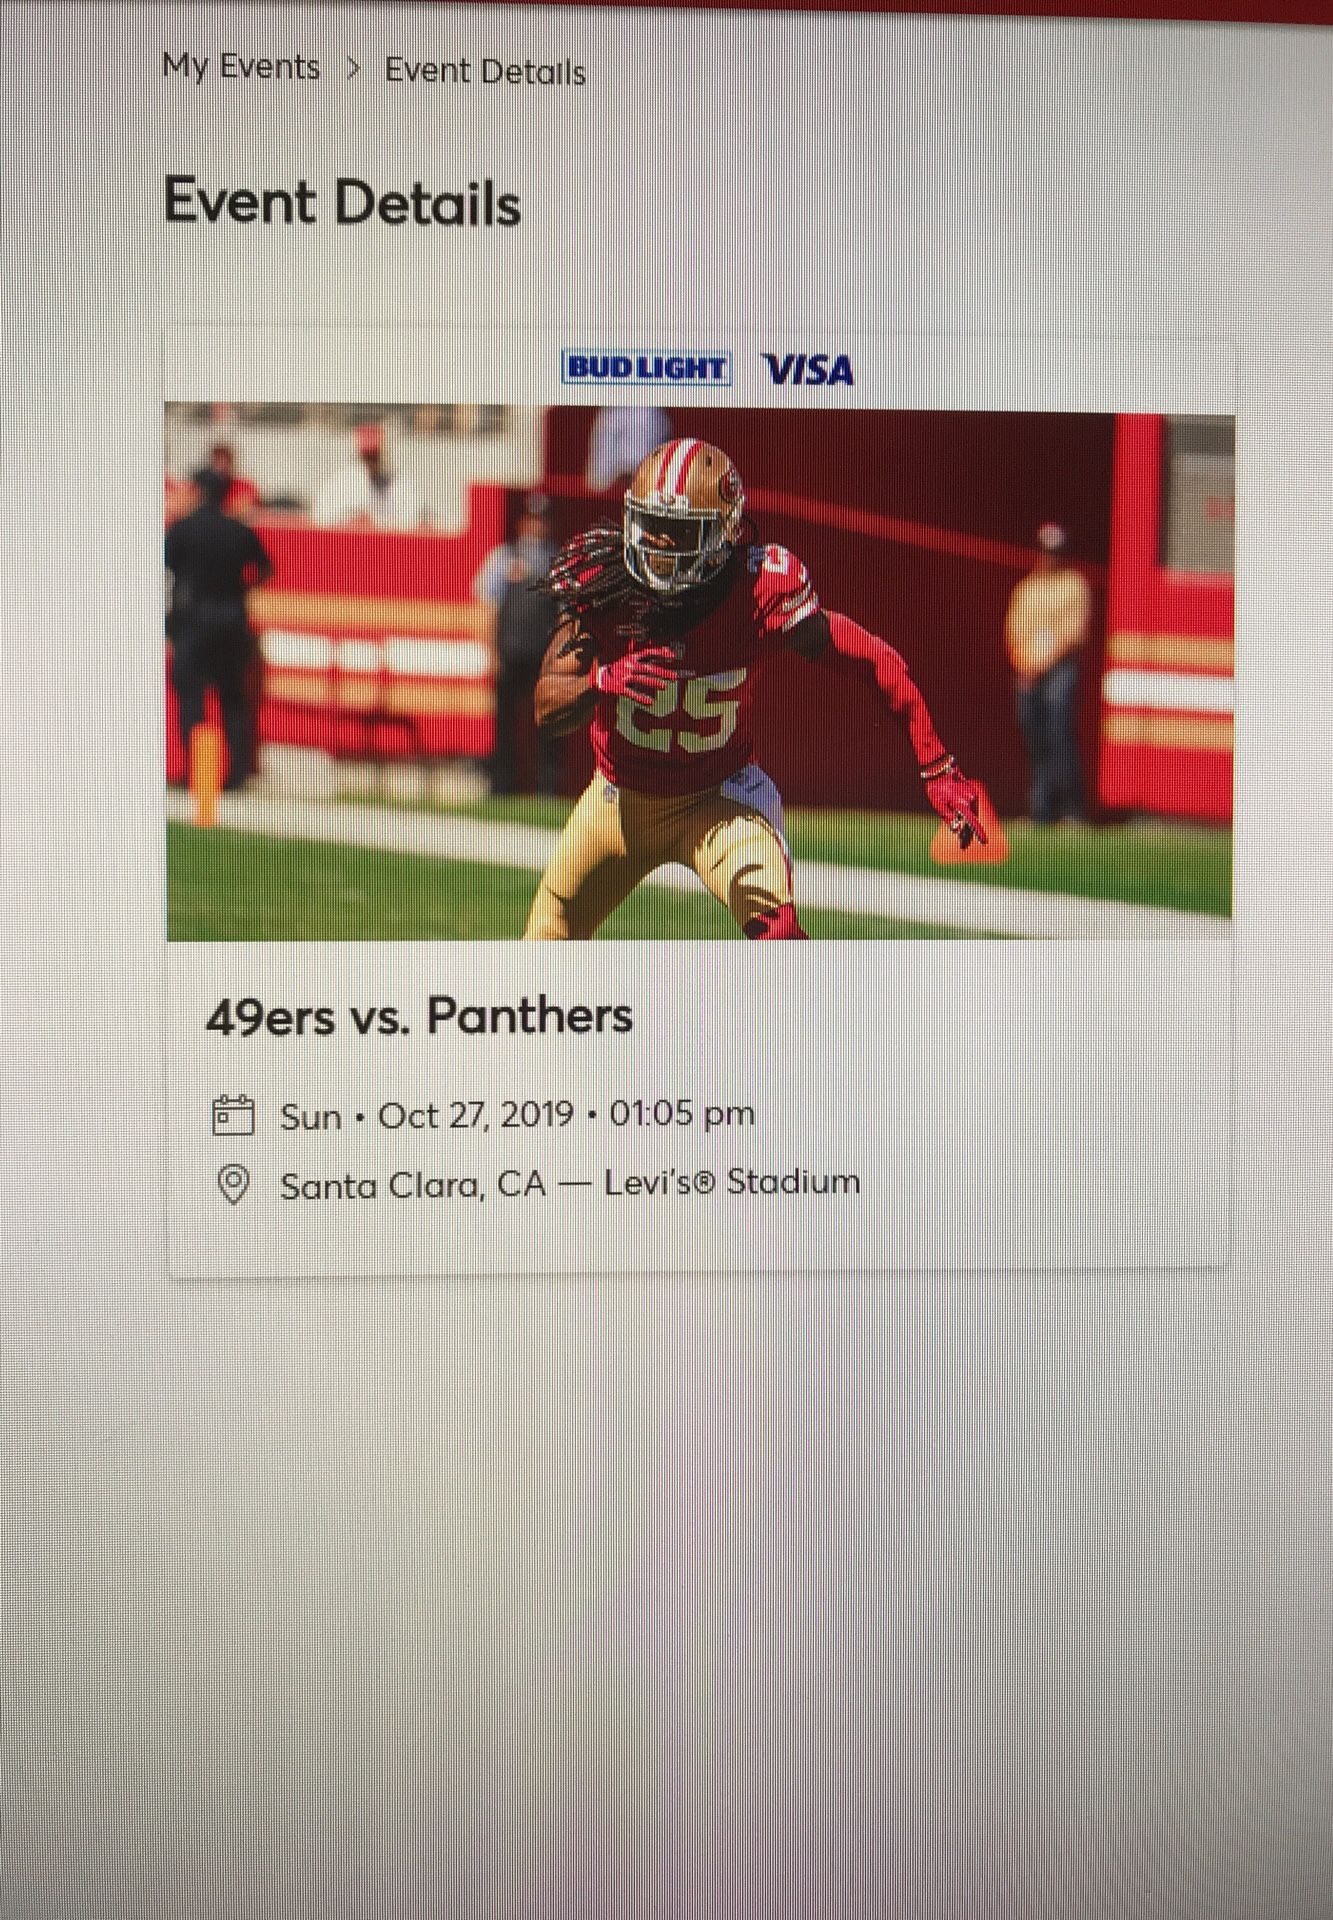 49ers vs. Panthers, 4 tickets, Sunday 10/27 at 1:05pm